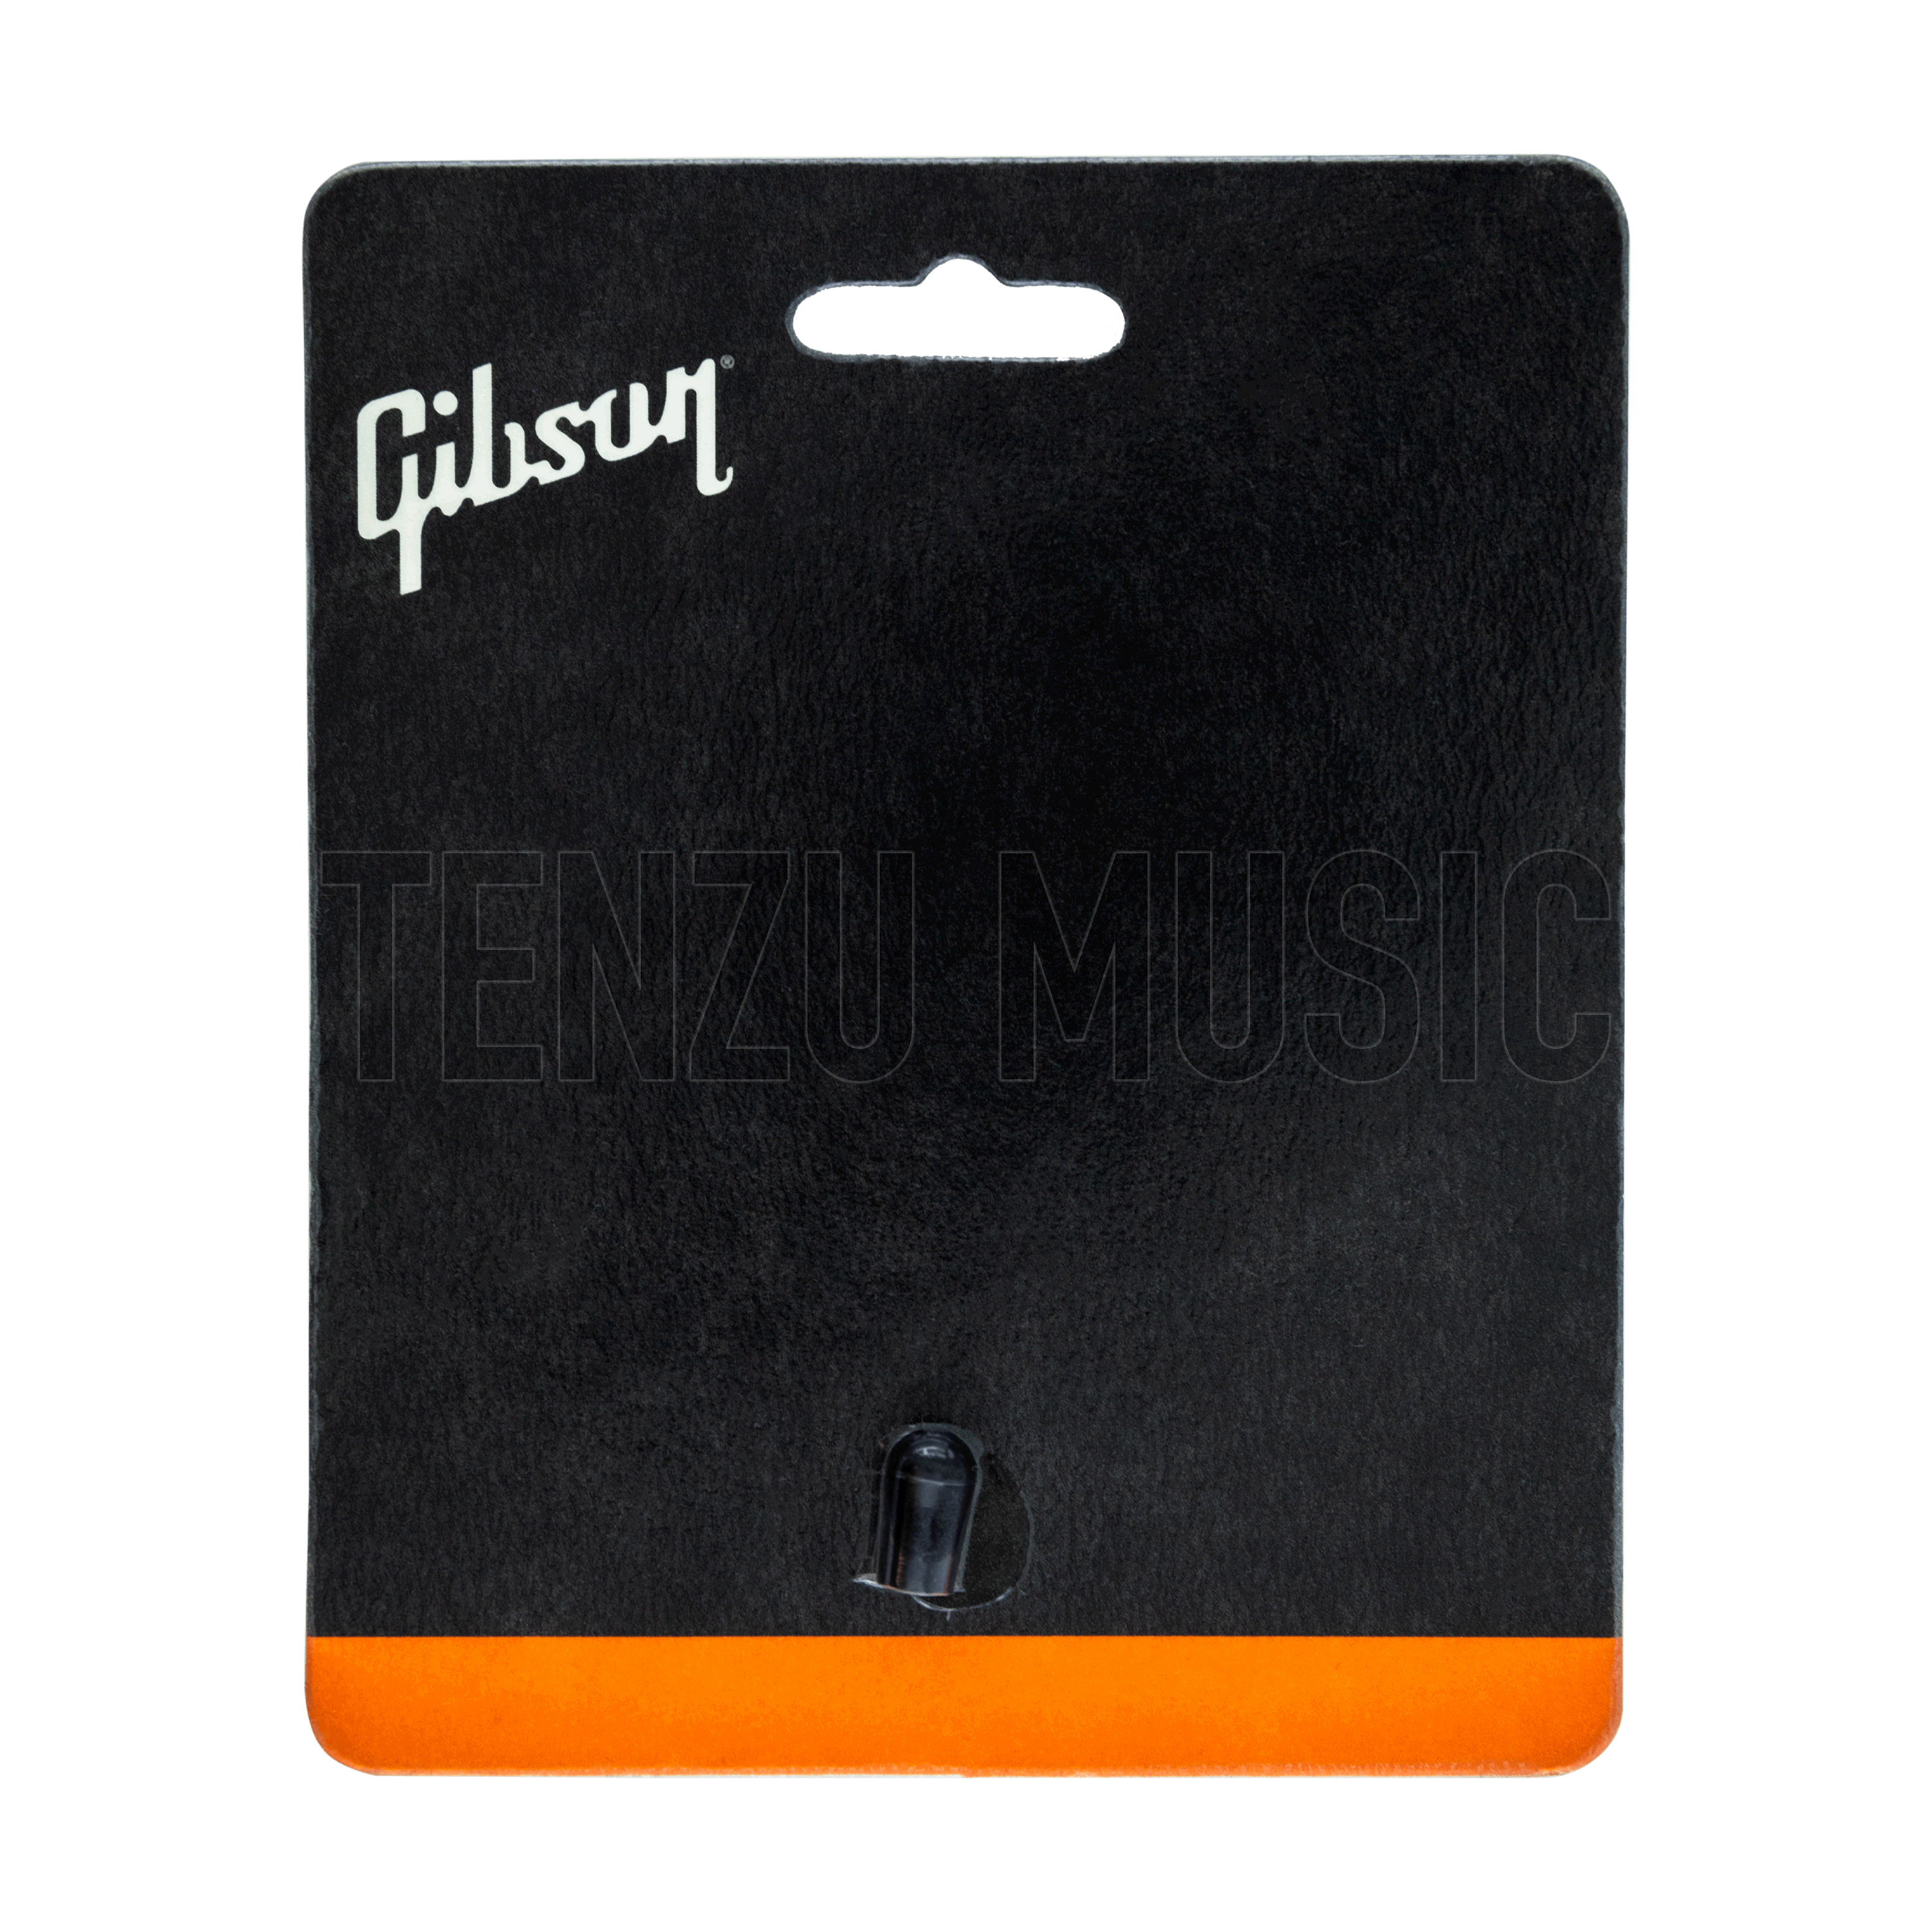 Gibson TOGGLE SWITCH CAP Black